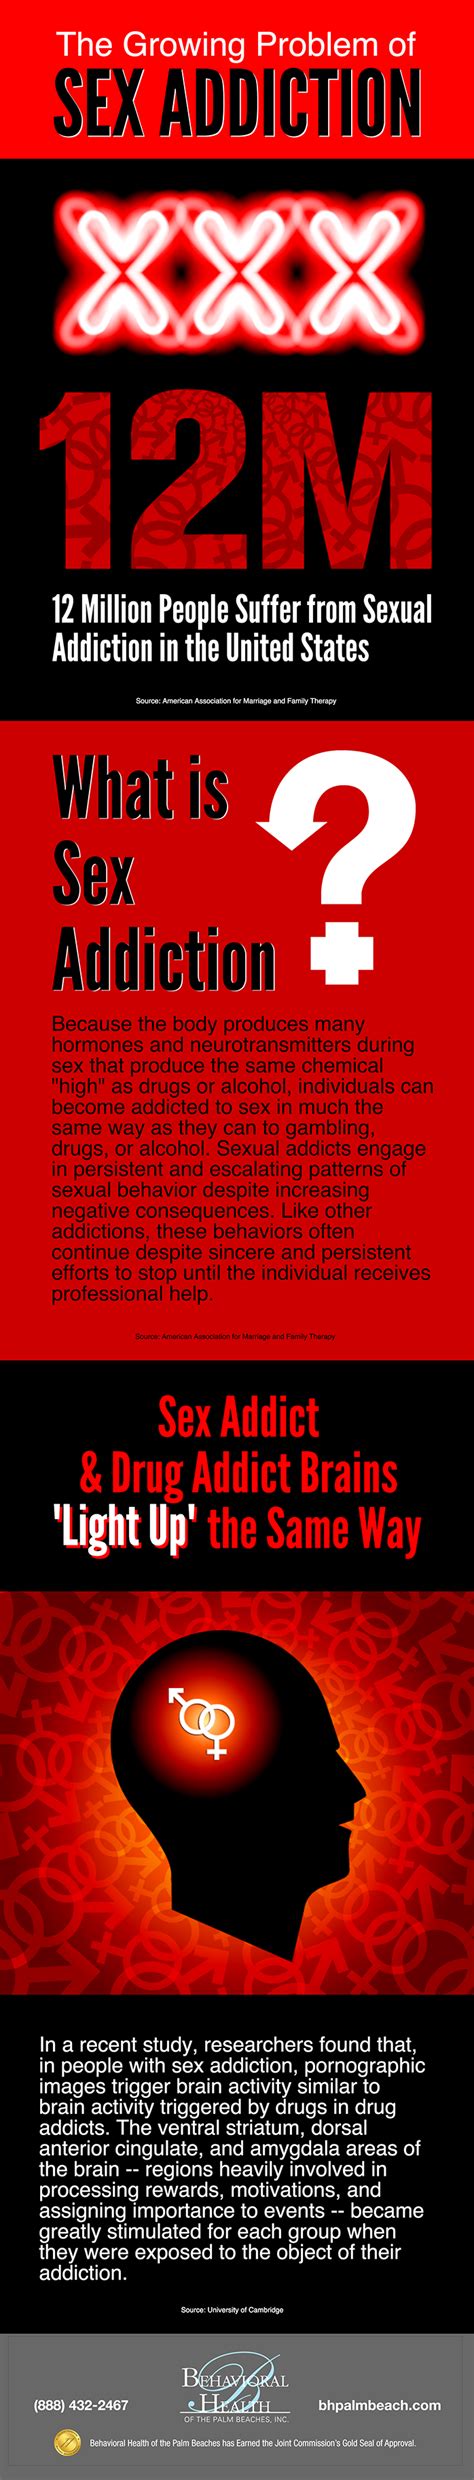 infographic the growing problem of sex addiction behavioral health